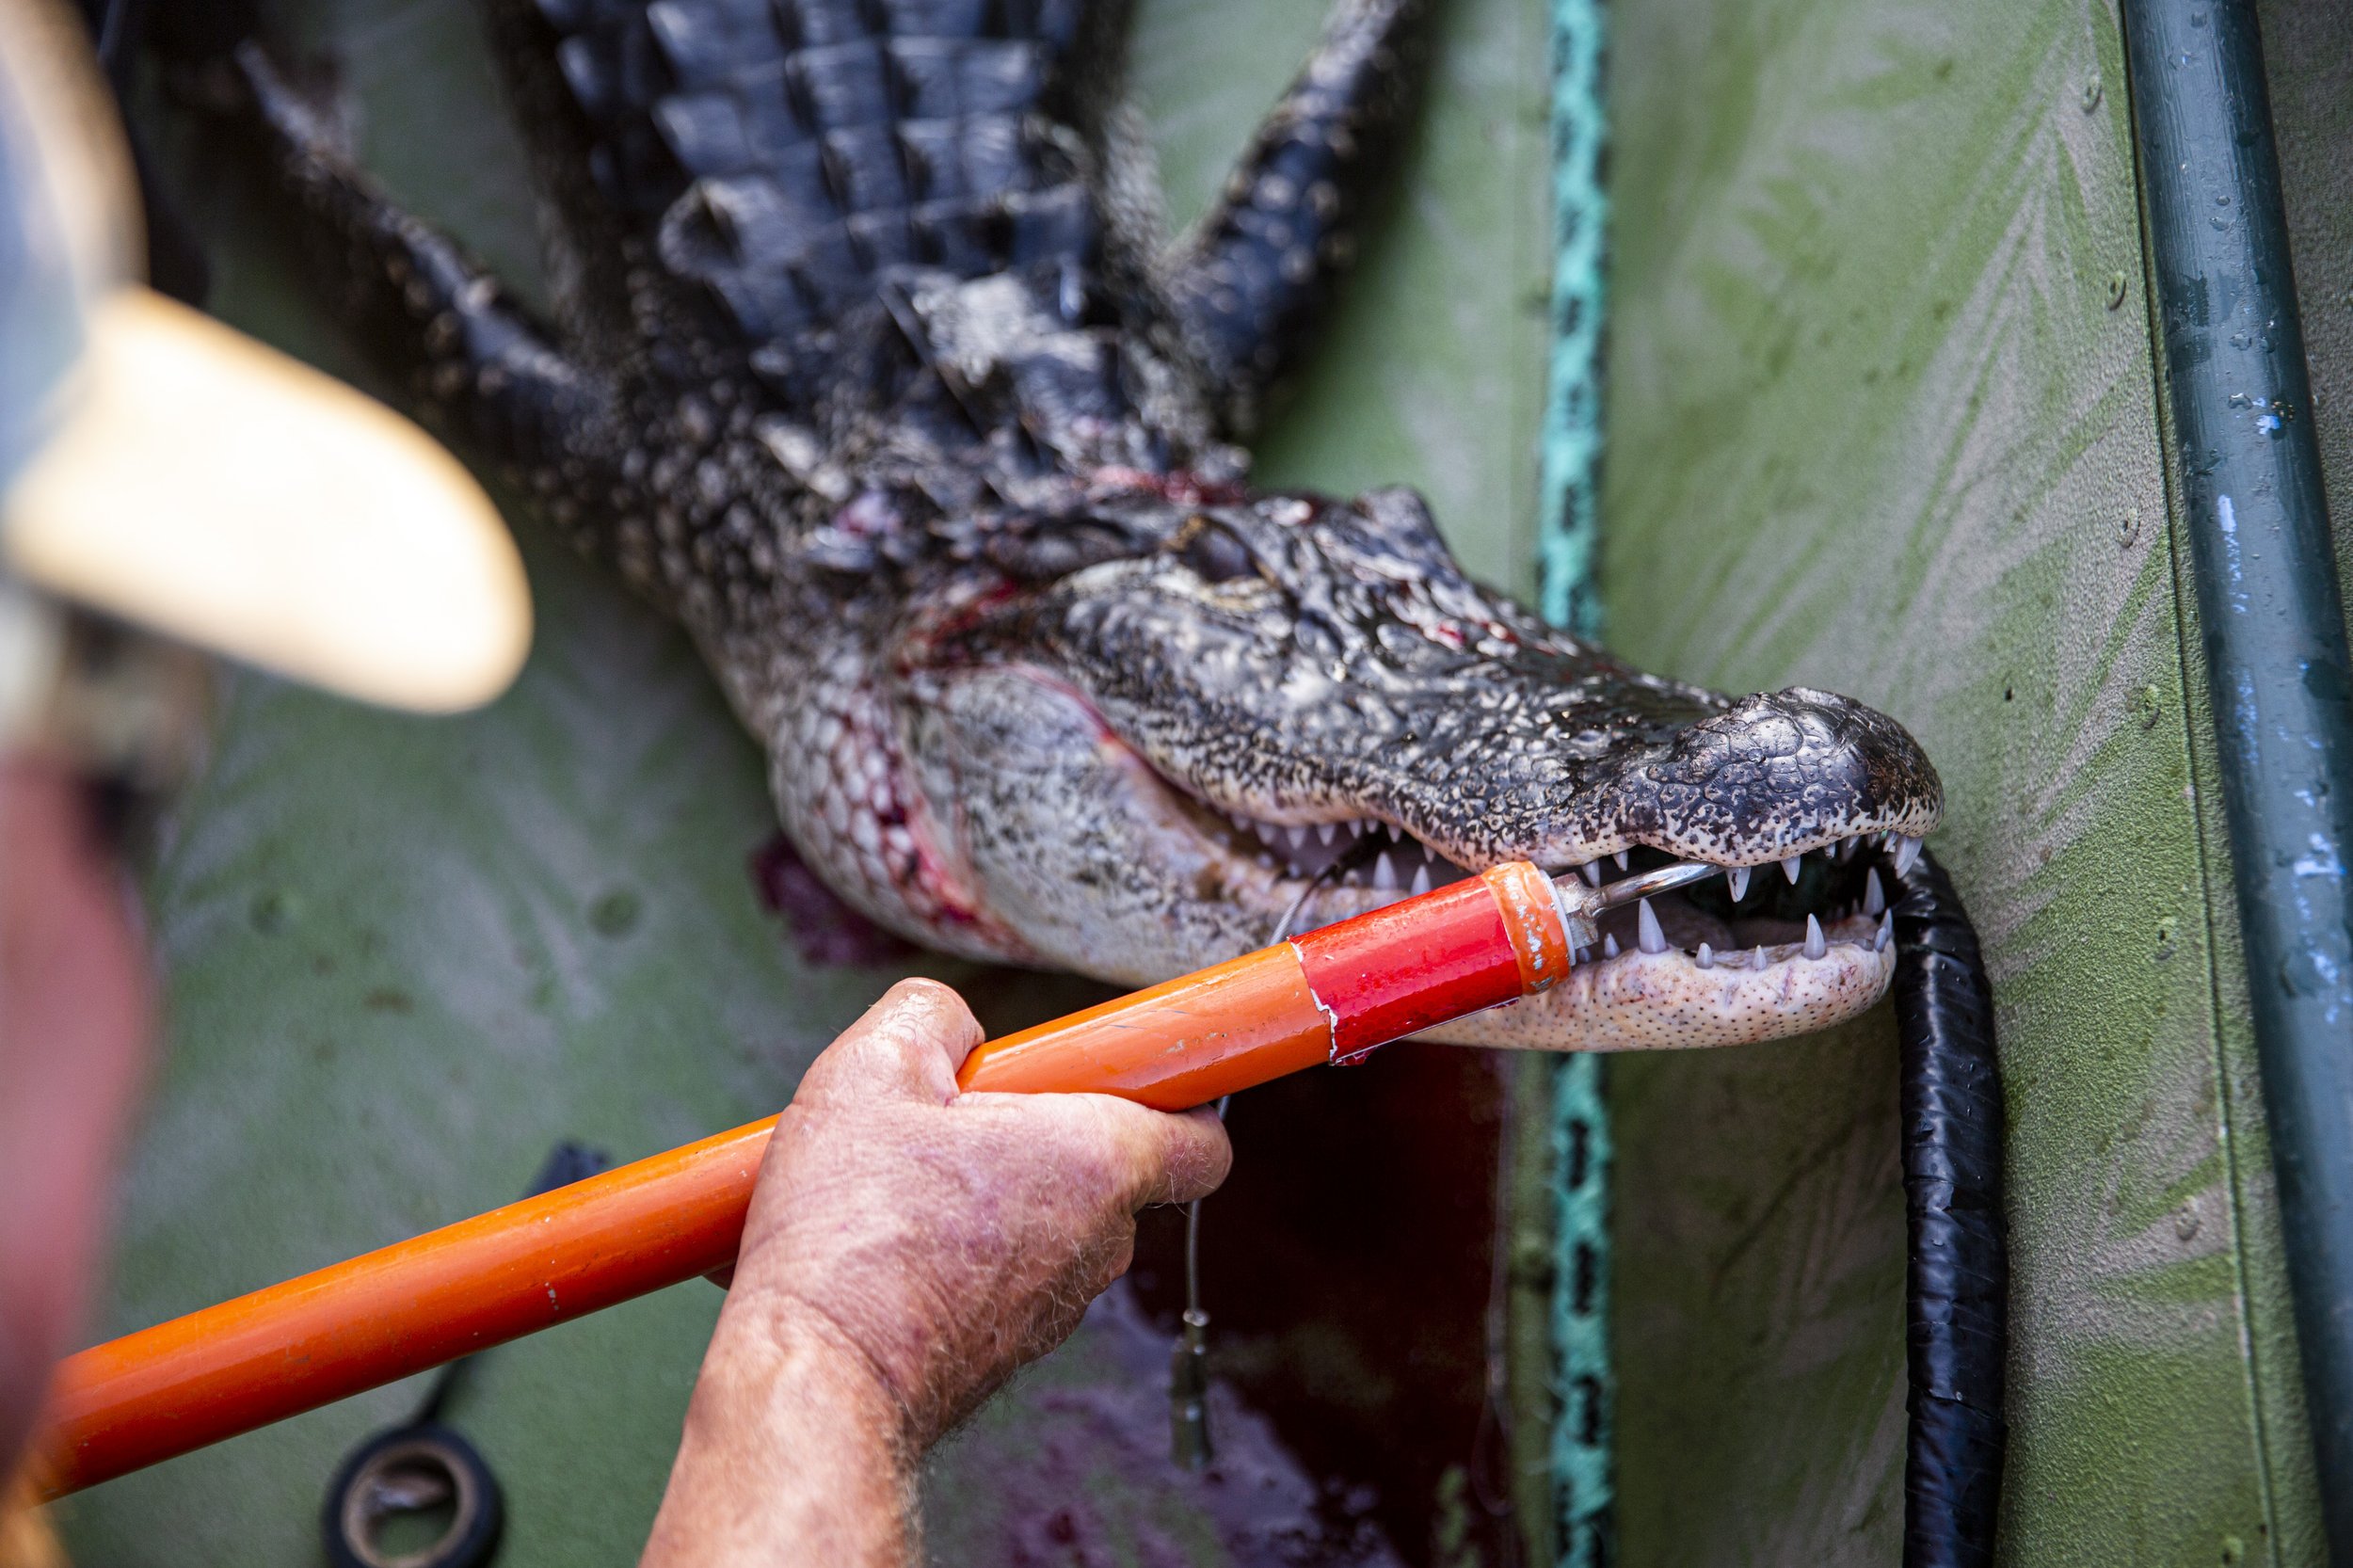  Capt. Bob Stafford works to pry a harpoon line from a gator's mouth after dispatching the animal and getting it in the boat during an alligator hunt with Okeechobee Charters on Lake Okeechobee Friday, Sept. 27, 2019. 